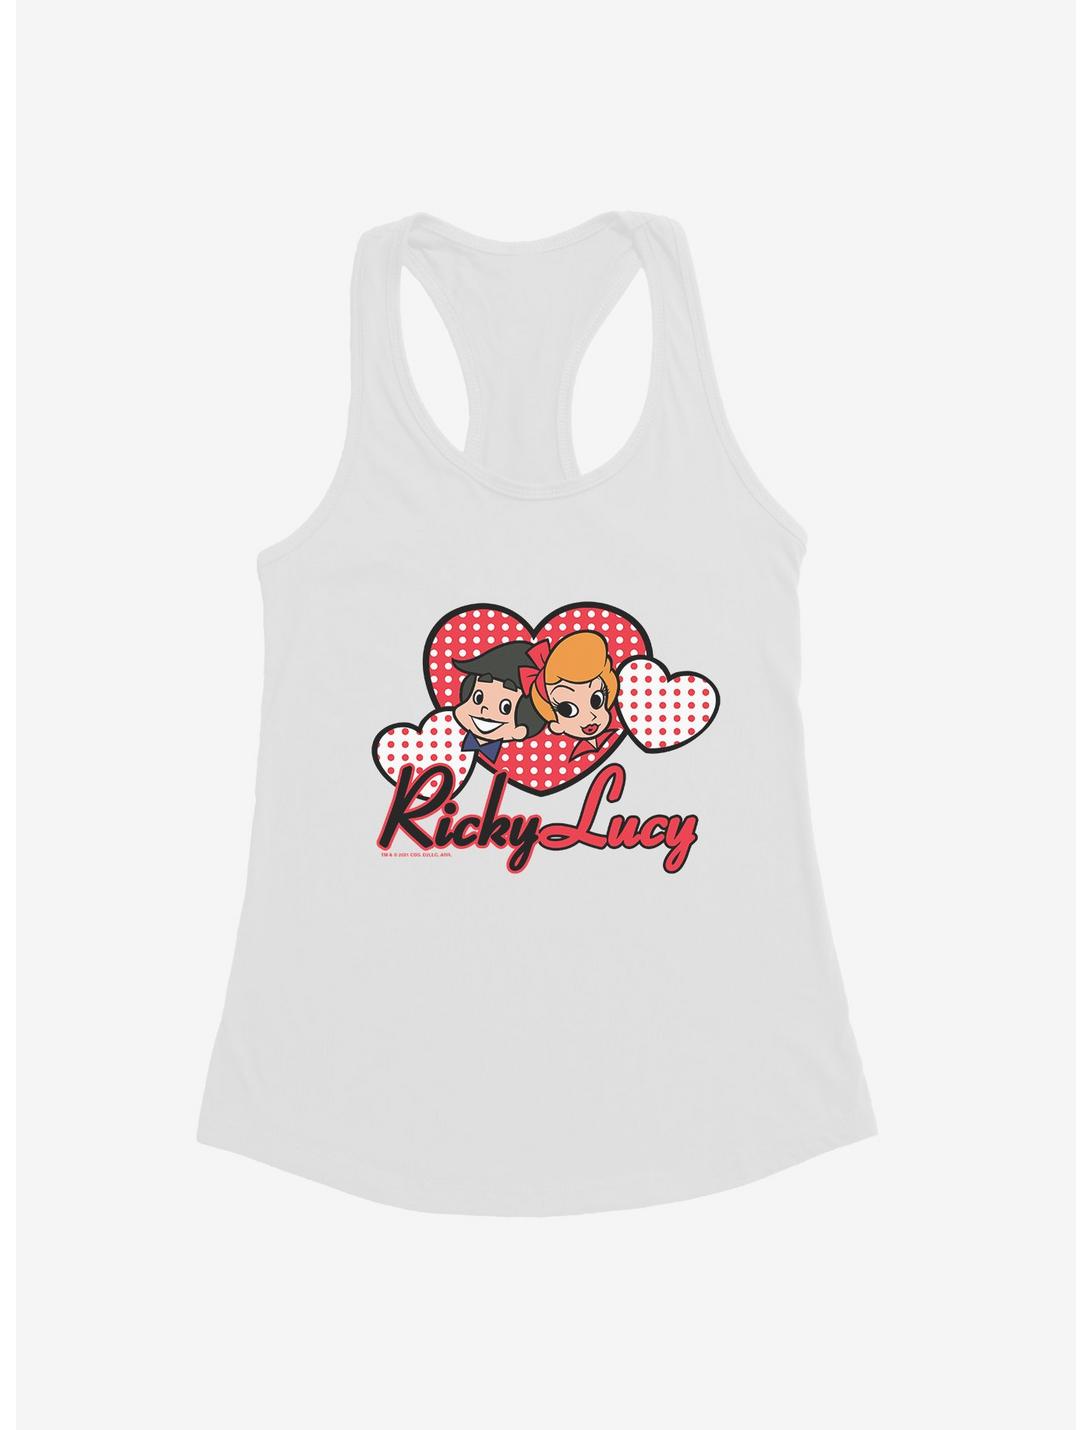 I Love Lucy Ricky And Lucy Cartoon In Color Girls Tank, WHITE, hi-res